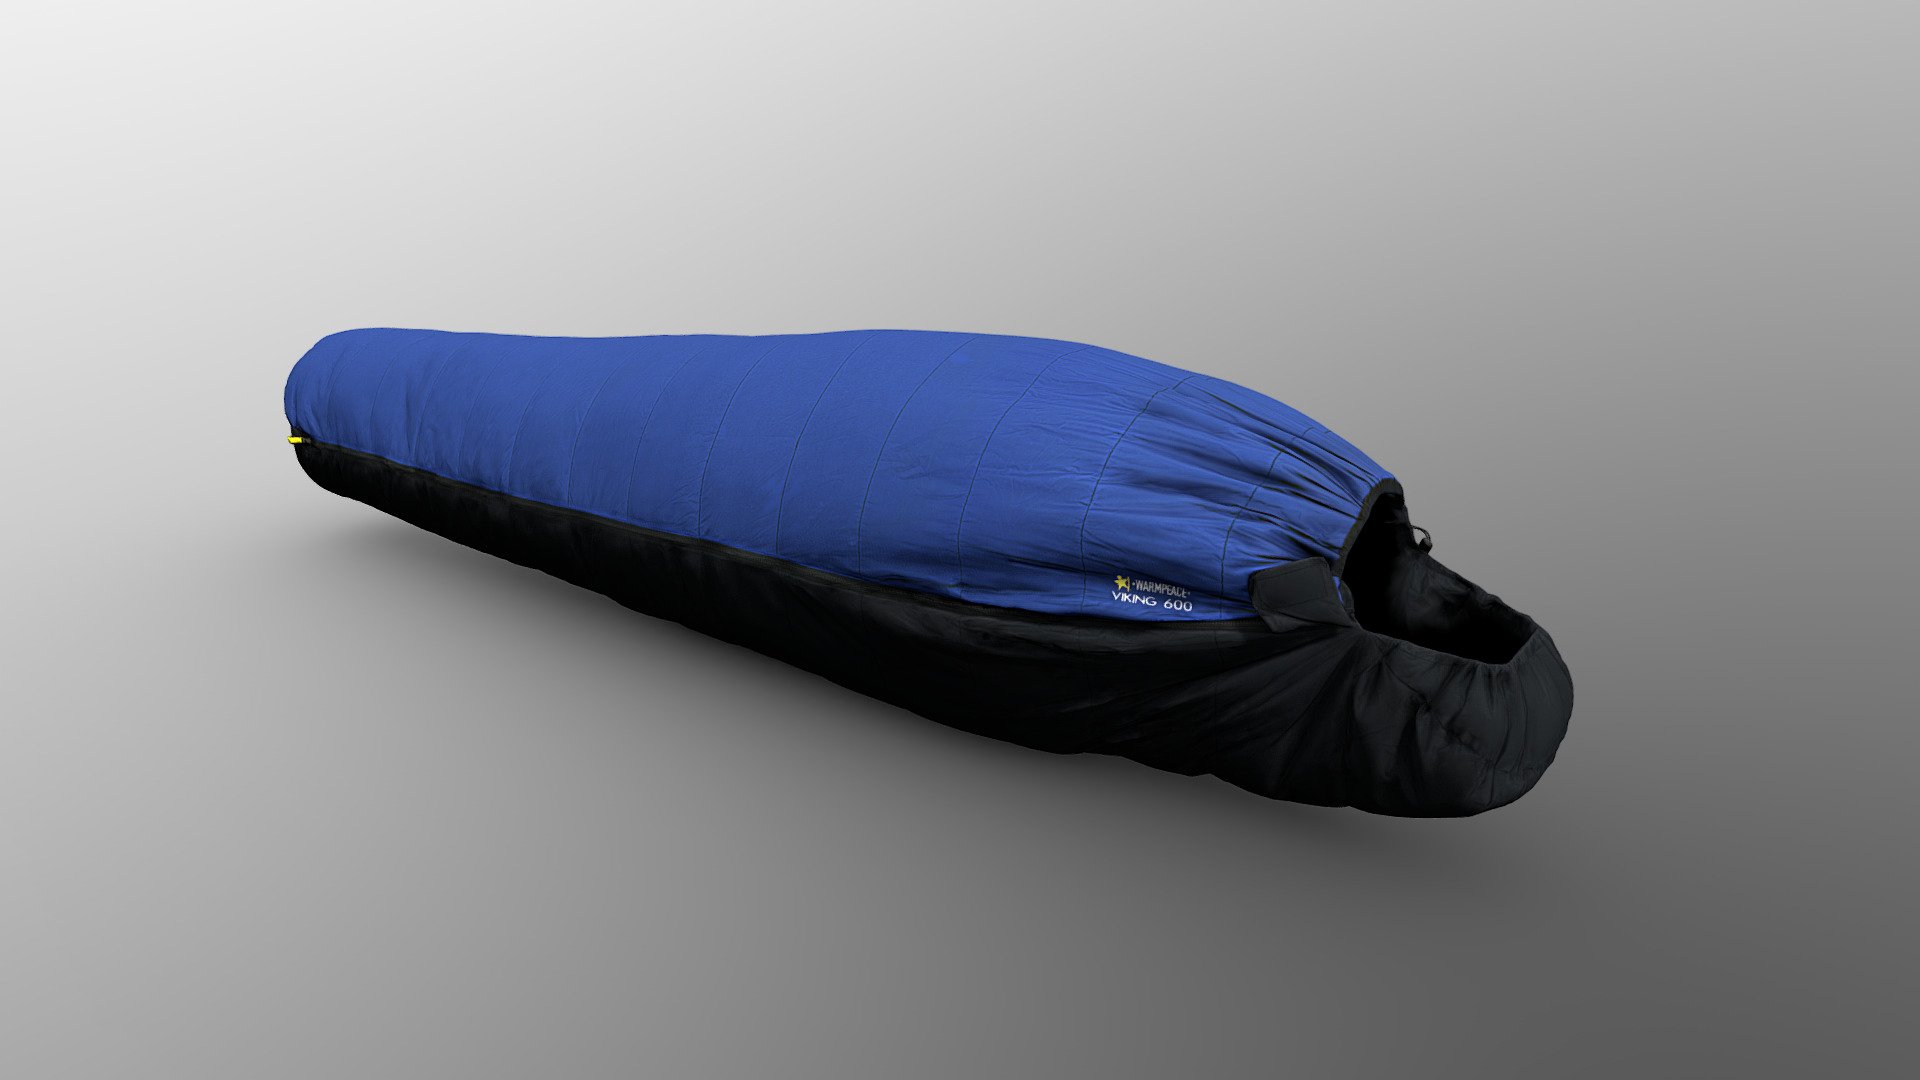 Scanned and optimized for web

50k polygons 4k textures

The sleeping bag is not exactly a magnificent model. It only demonstrates the possibilities that scanning provides 3d model